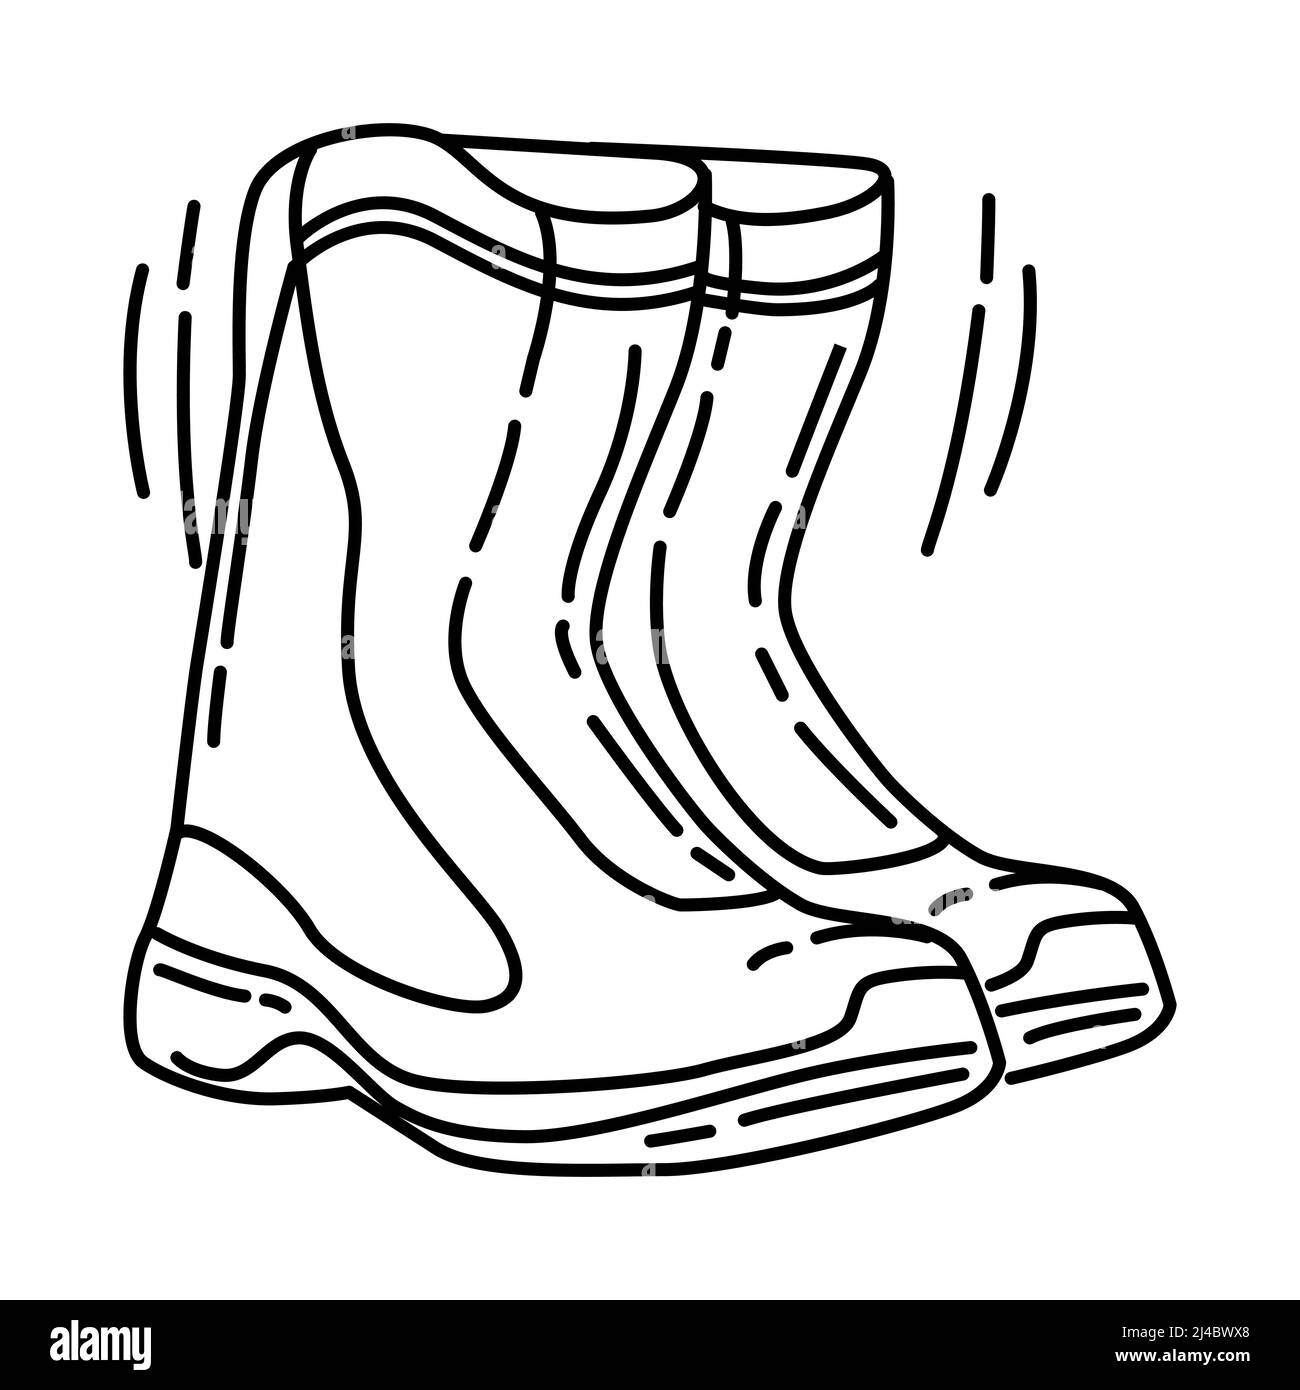 Motorcycle Boots Part of Biker and Accessories Hand Drawn Icon Set ...